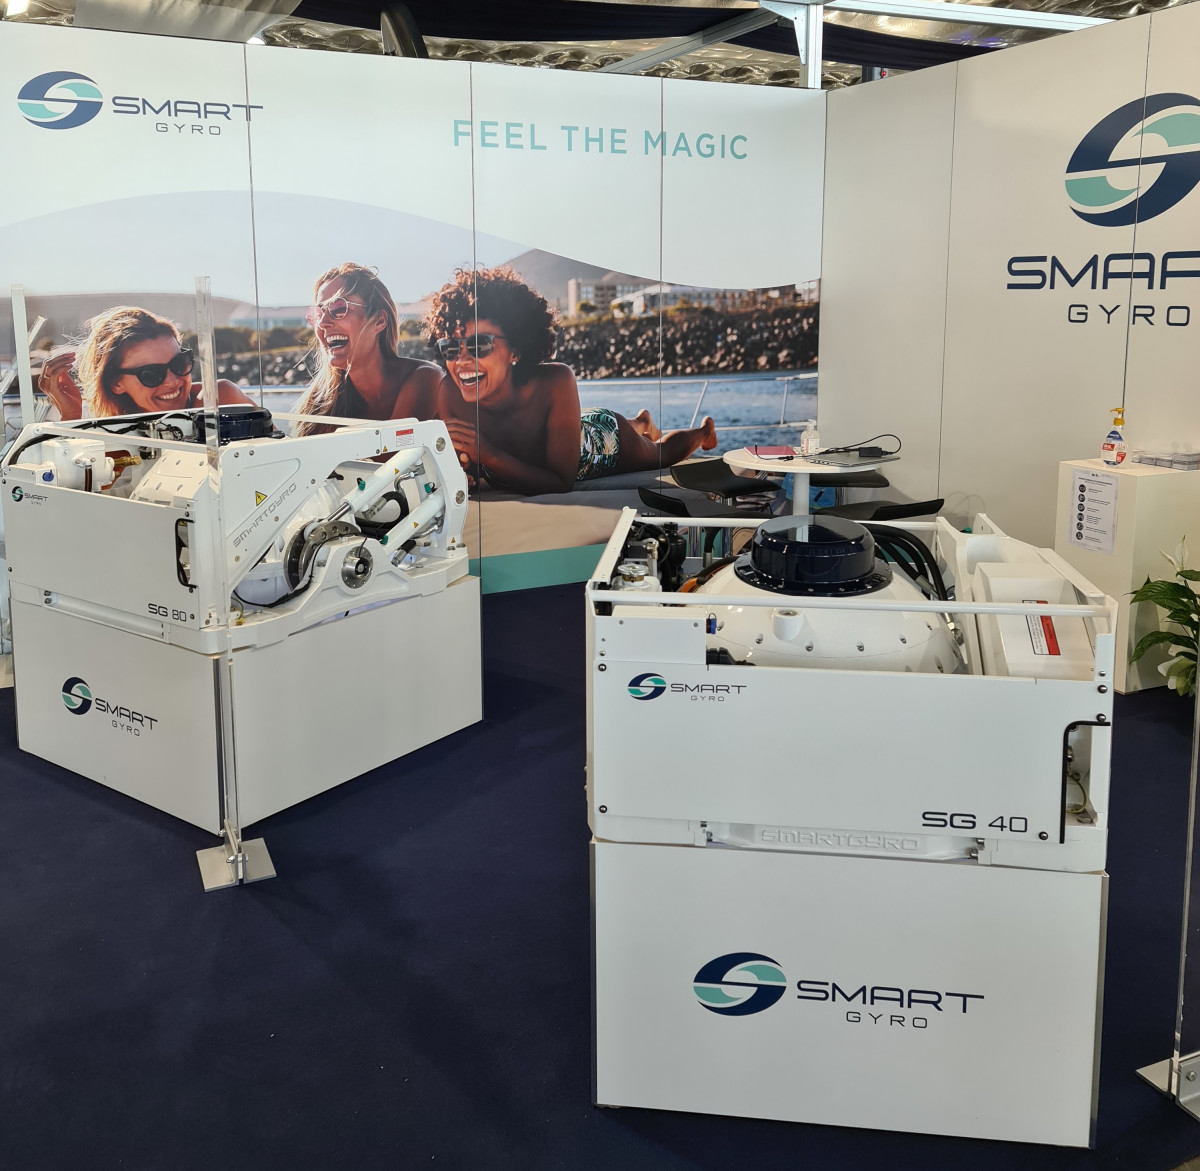 Attendees at Europe and U.S. boat shows may see Smartgyro’s latest SG series models.